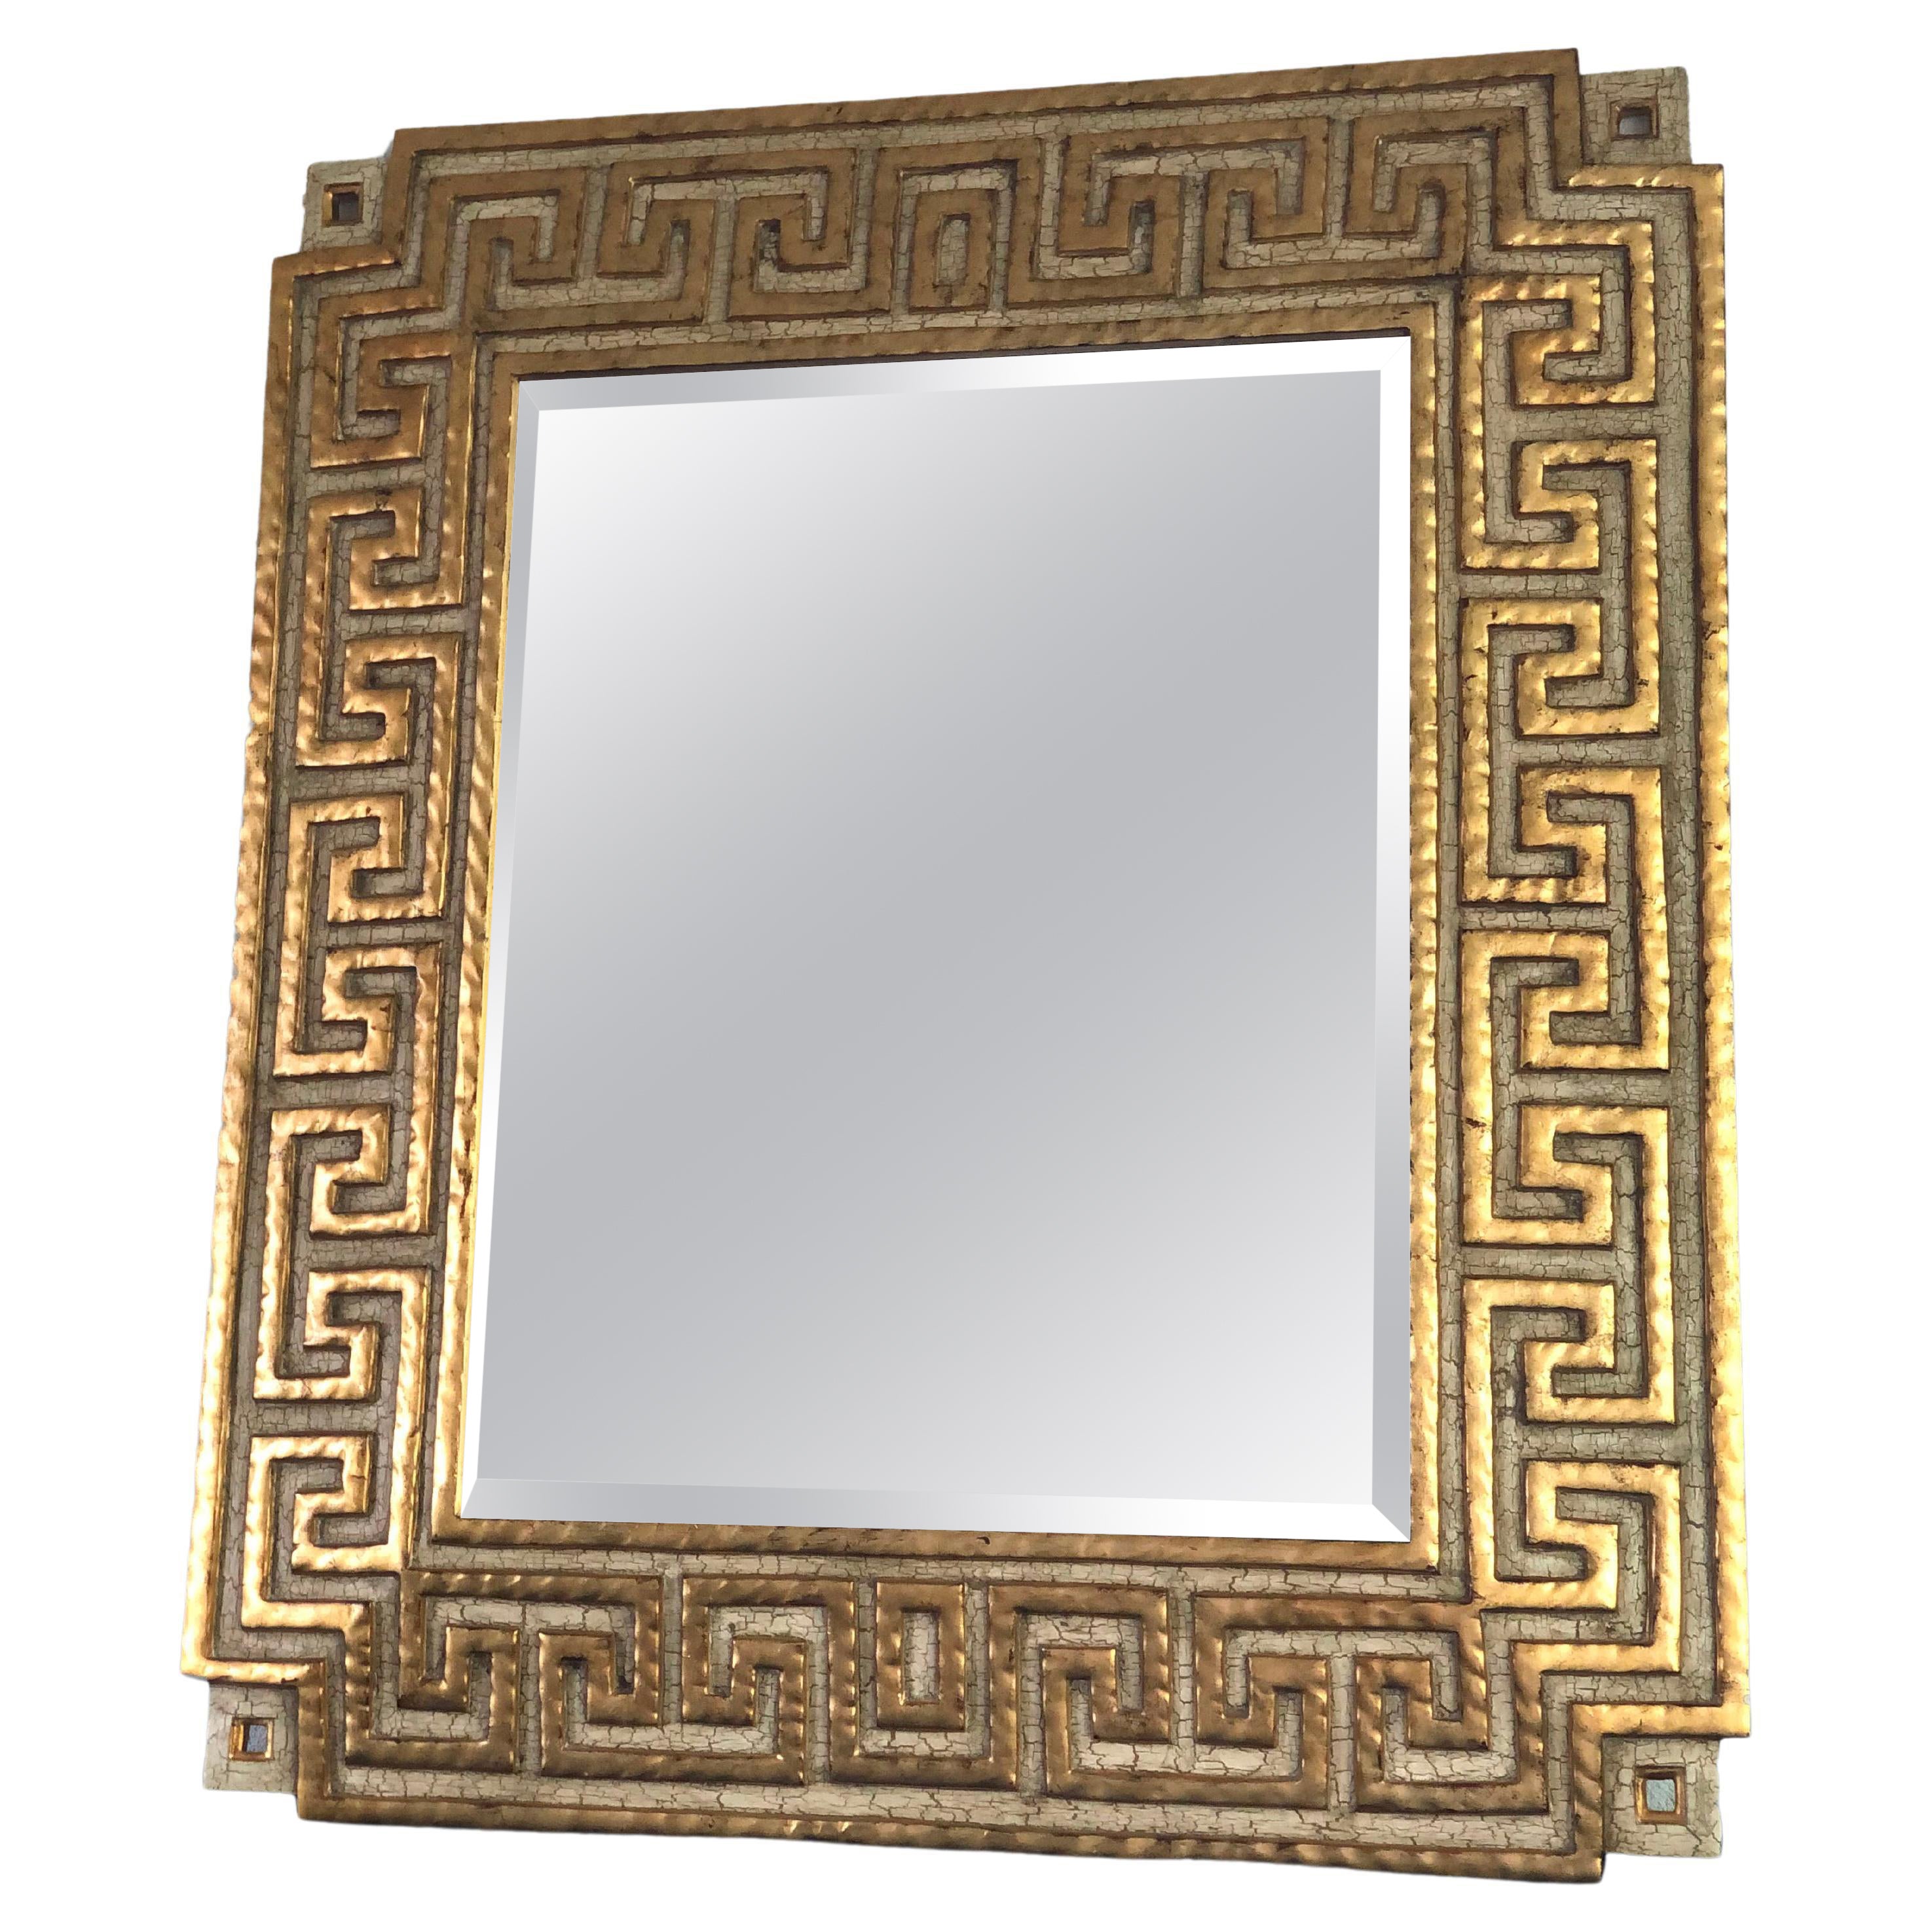 Harrison & Gil Design Giltwood Facet Cut Mirror with Meander Pattern For Sale